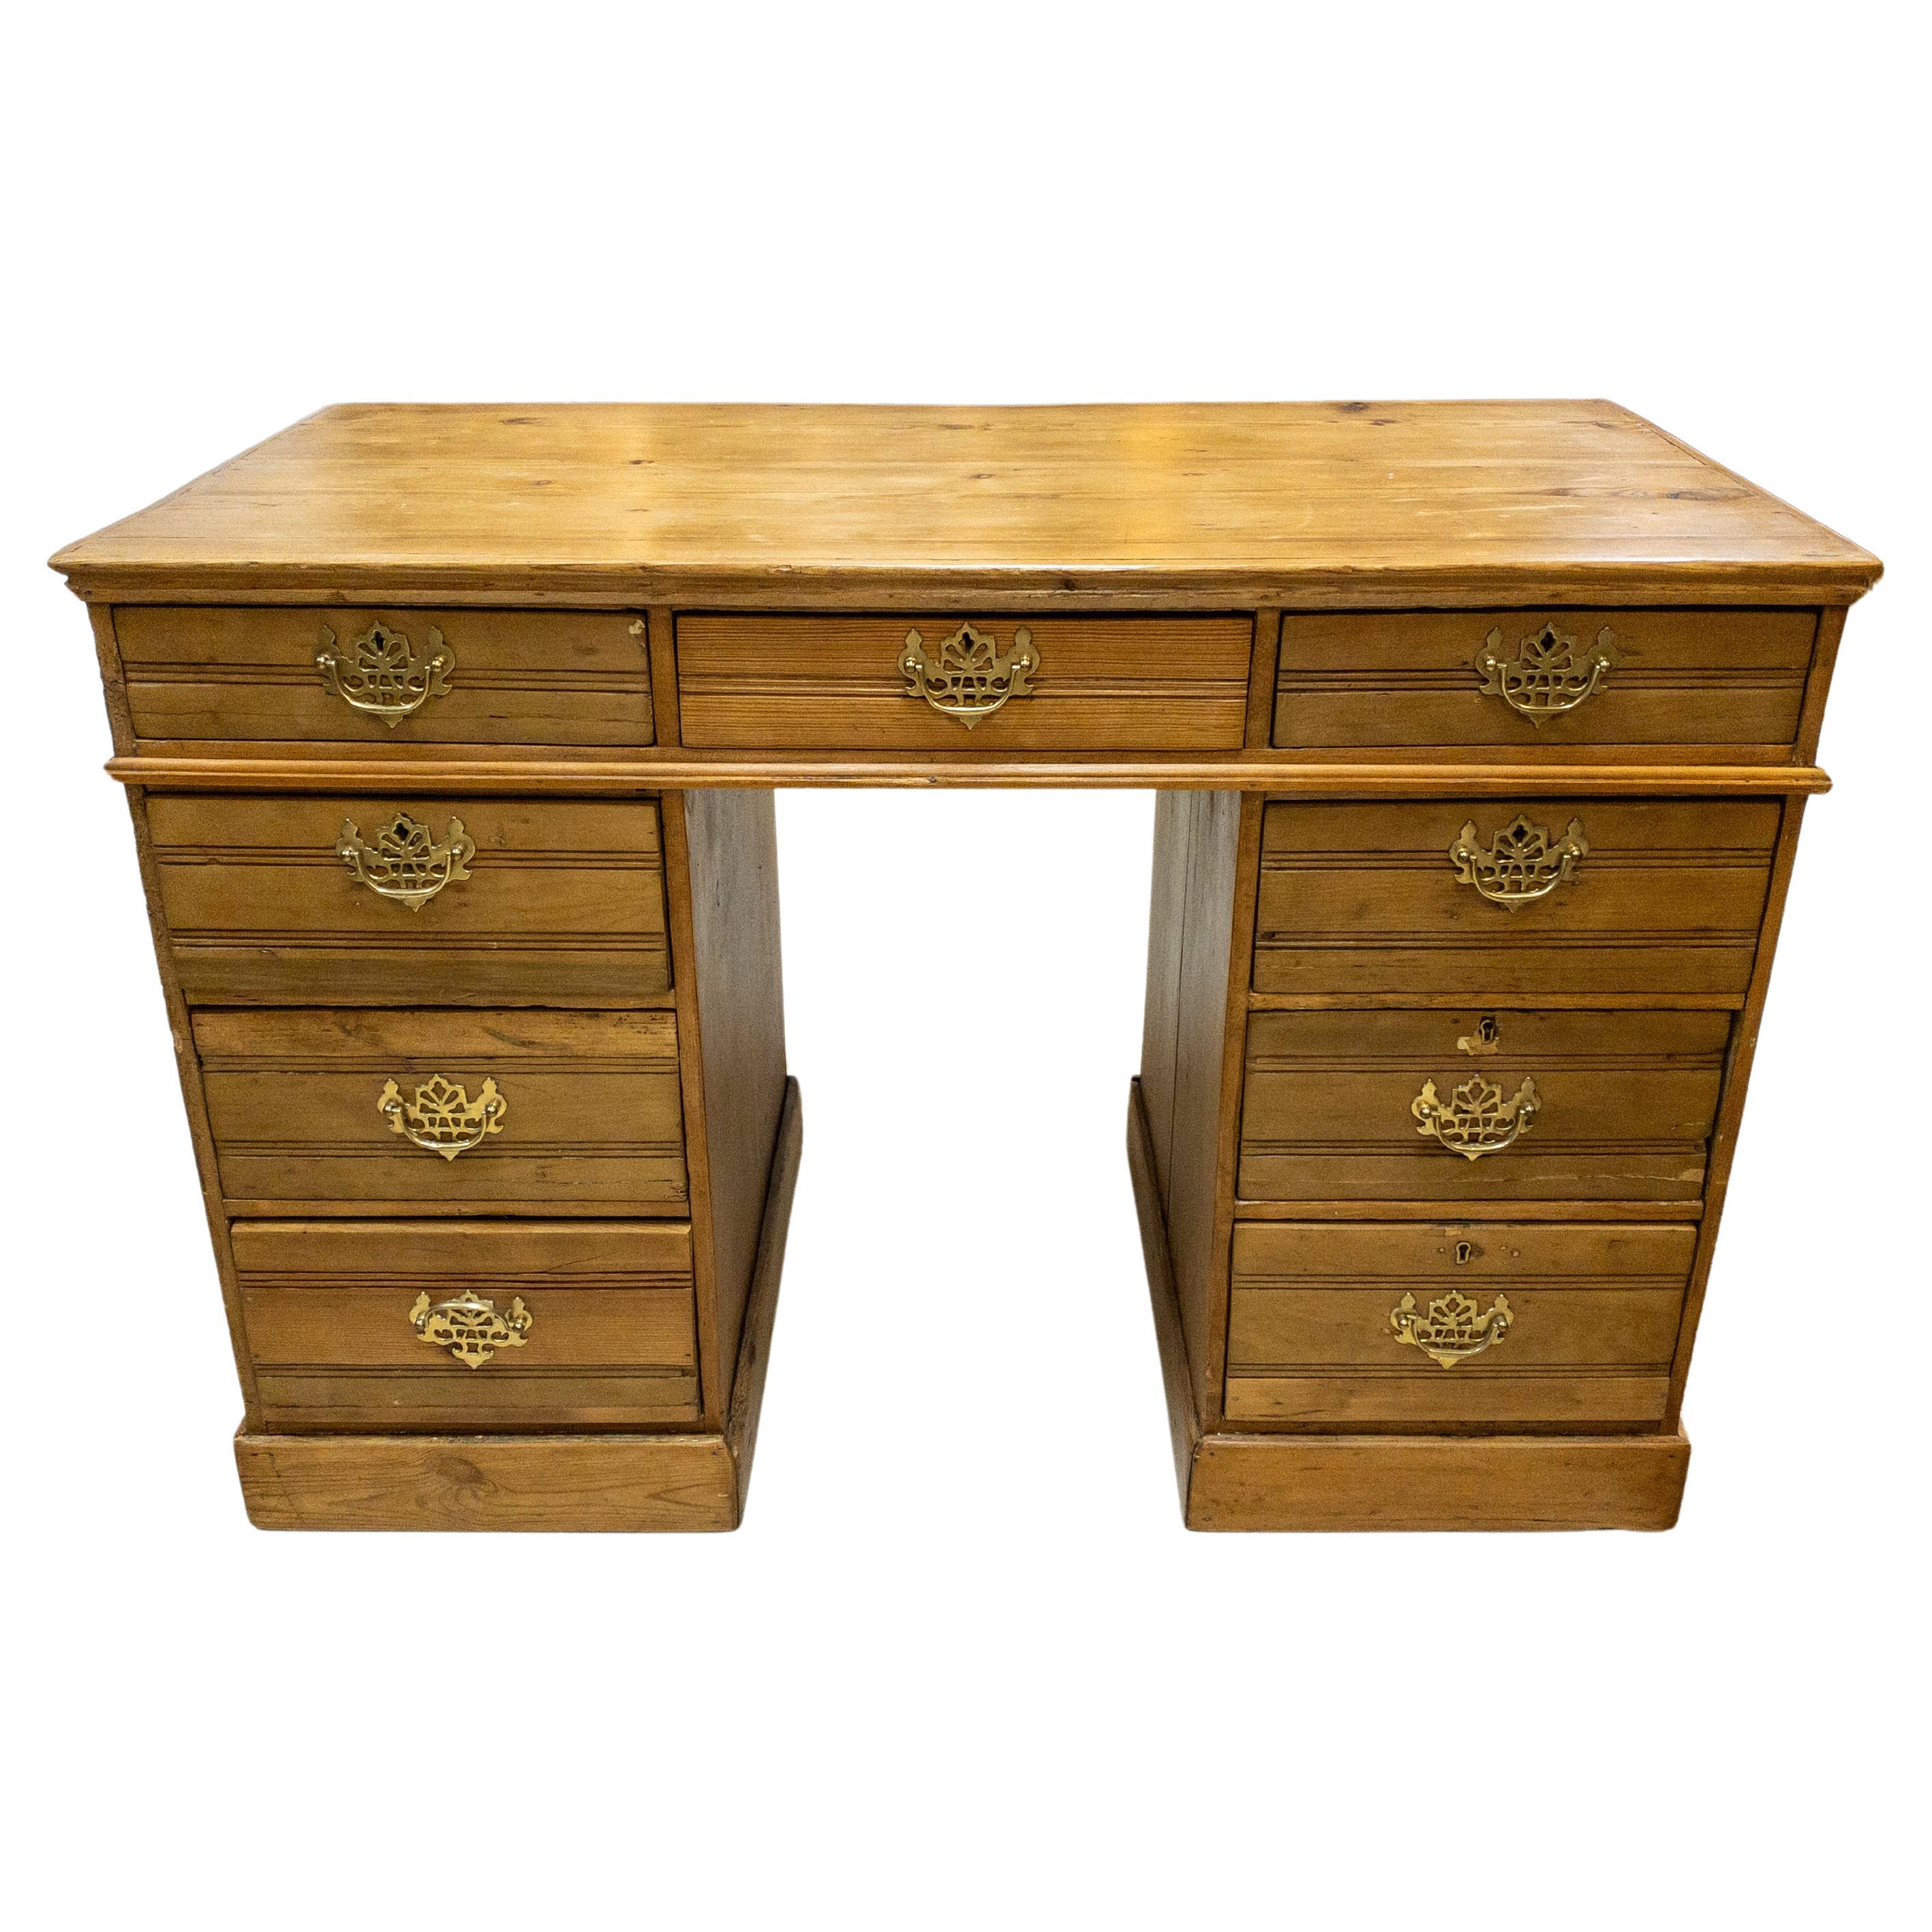 1920's English Pine Desk For Sale